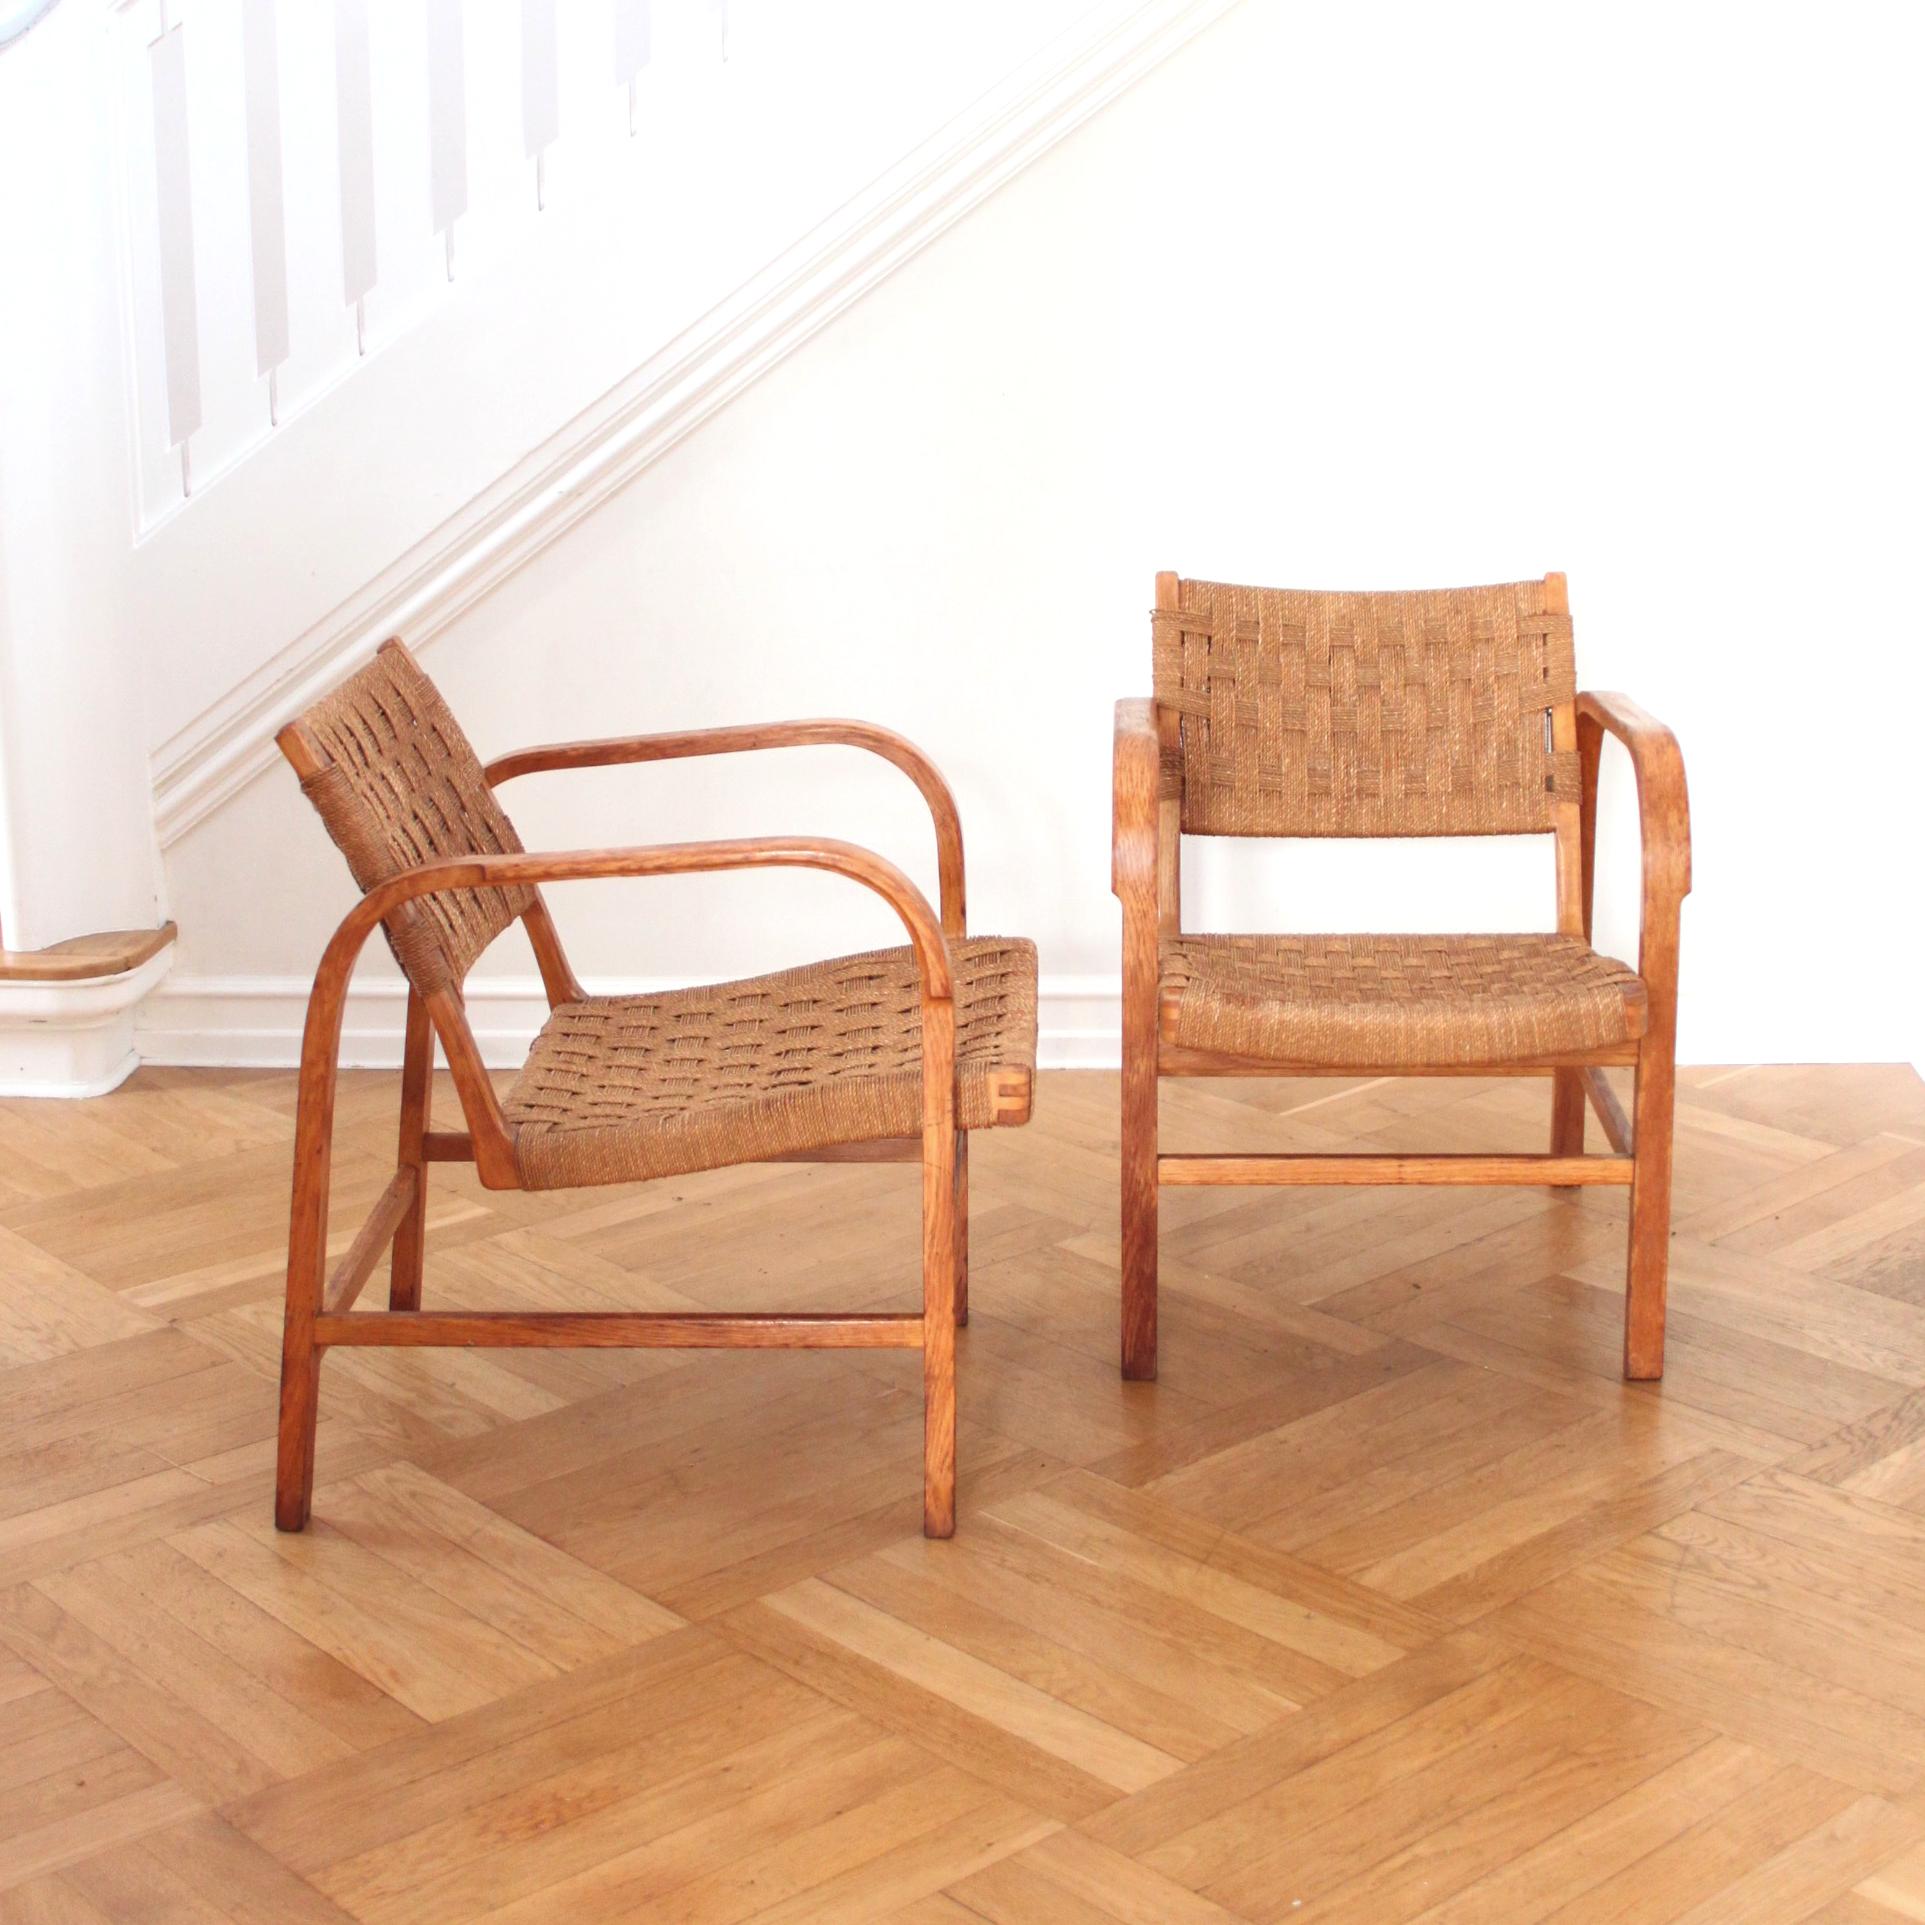 MAGNUS STEPHENSEN & FRITZ HANSEN

SCANDINAVIAN MODERN

A beautiful pair of armchairs by Danish architect and designer Magnus Stephensen for Fritz Hansen, Denmark 1930s.

The armchairs are made of a bent beech frame with a woven seagrass seating and